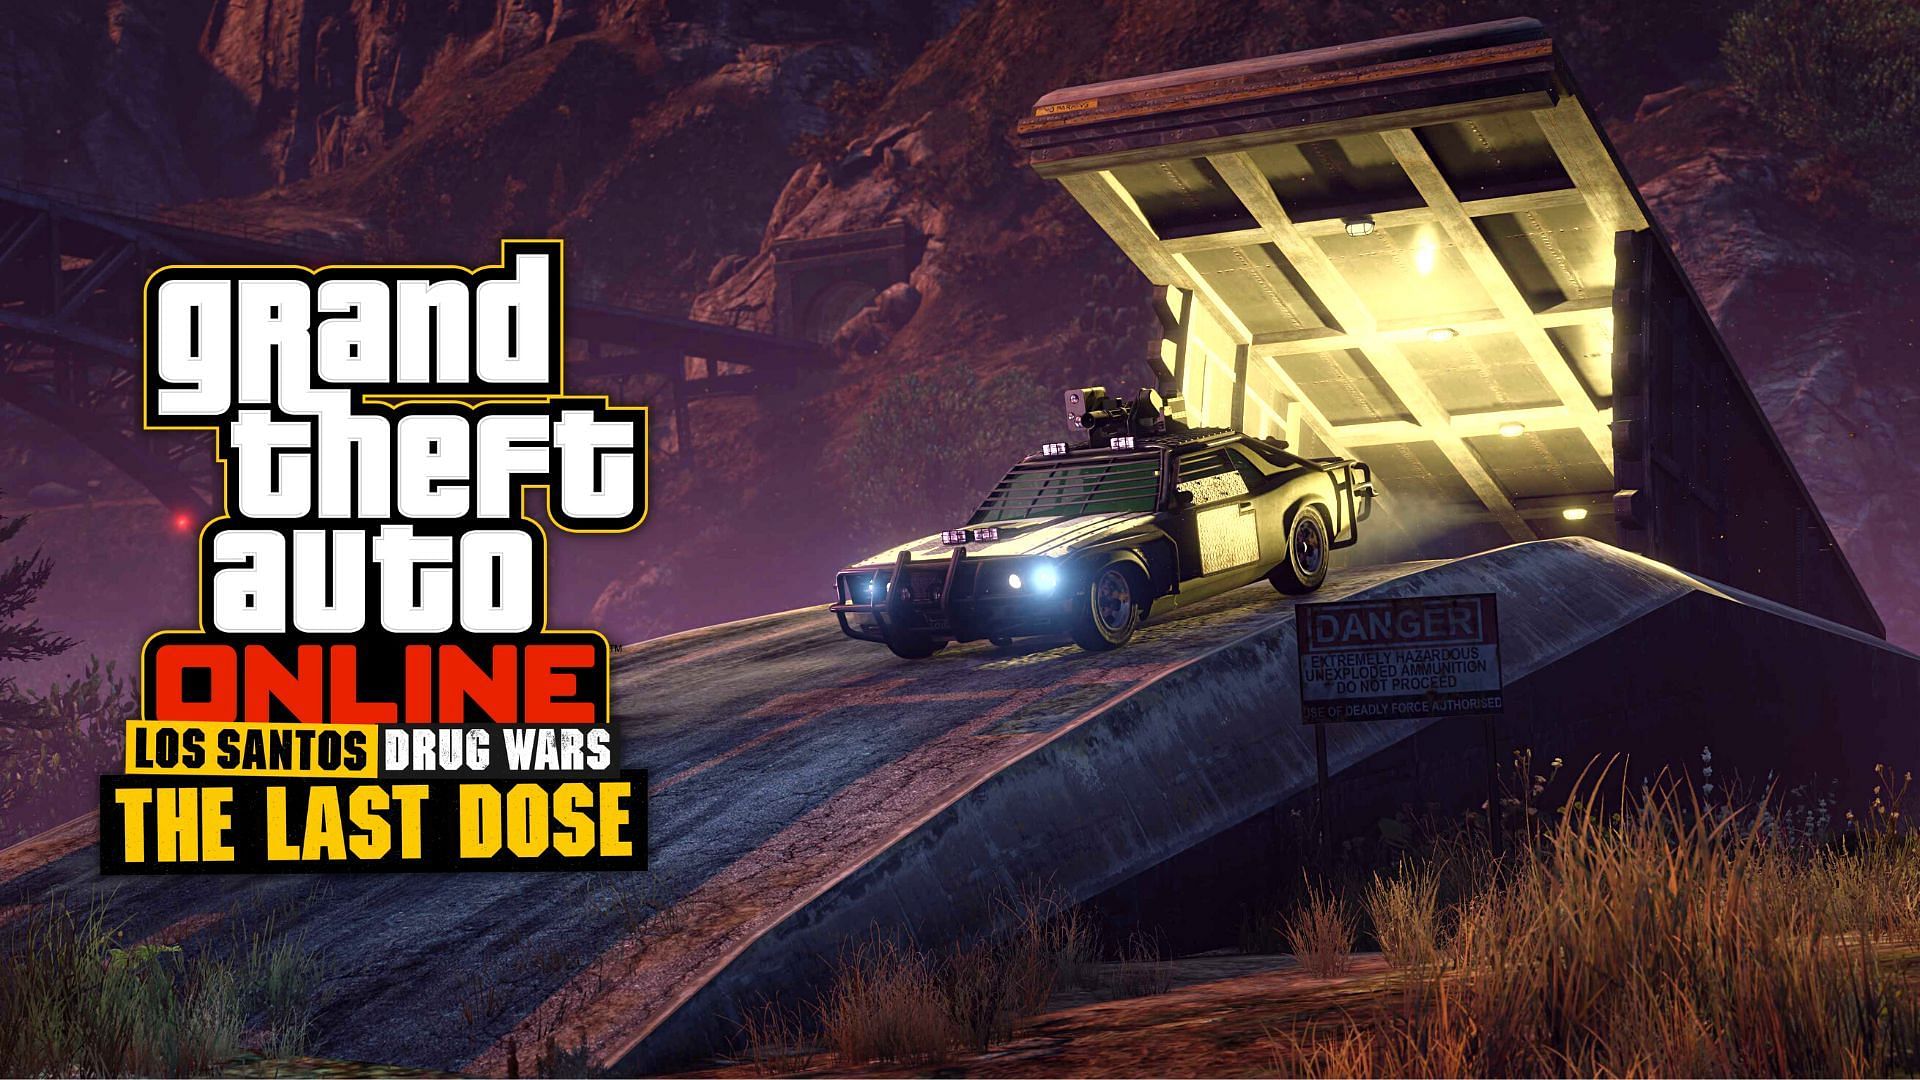 A brief about Bunker bonuses in GTA Online this week, and how players can start a Gunrunning business after The Last Dose update (Image via Rockstar Games)